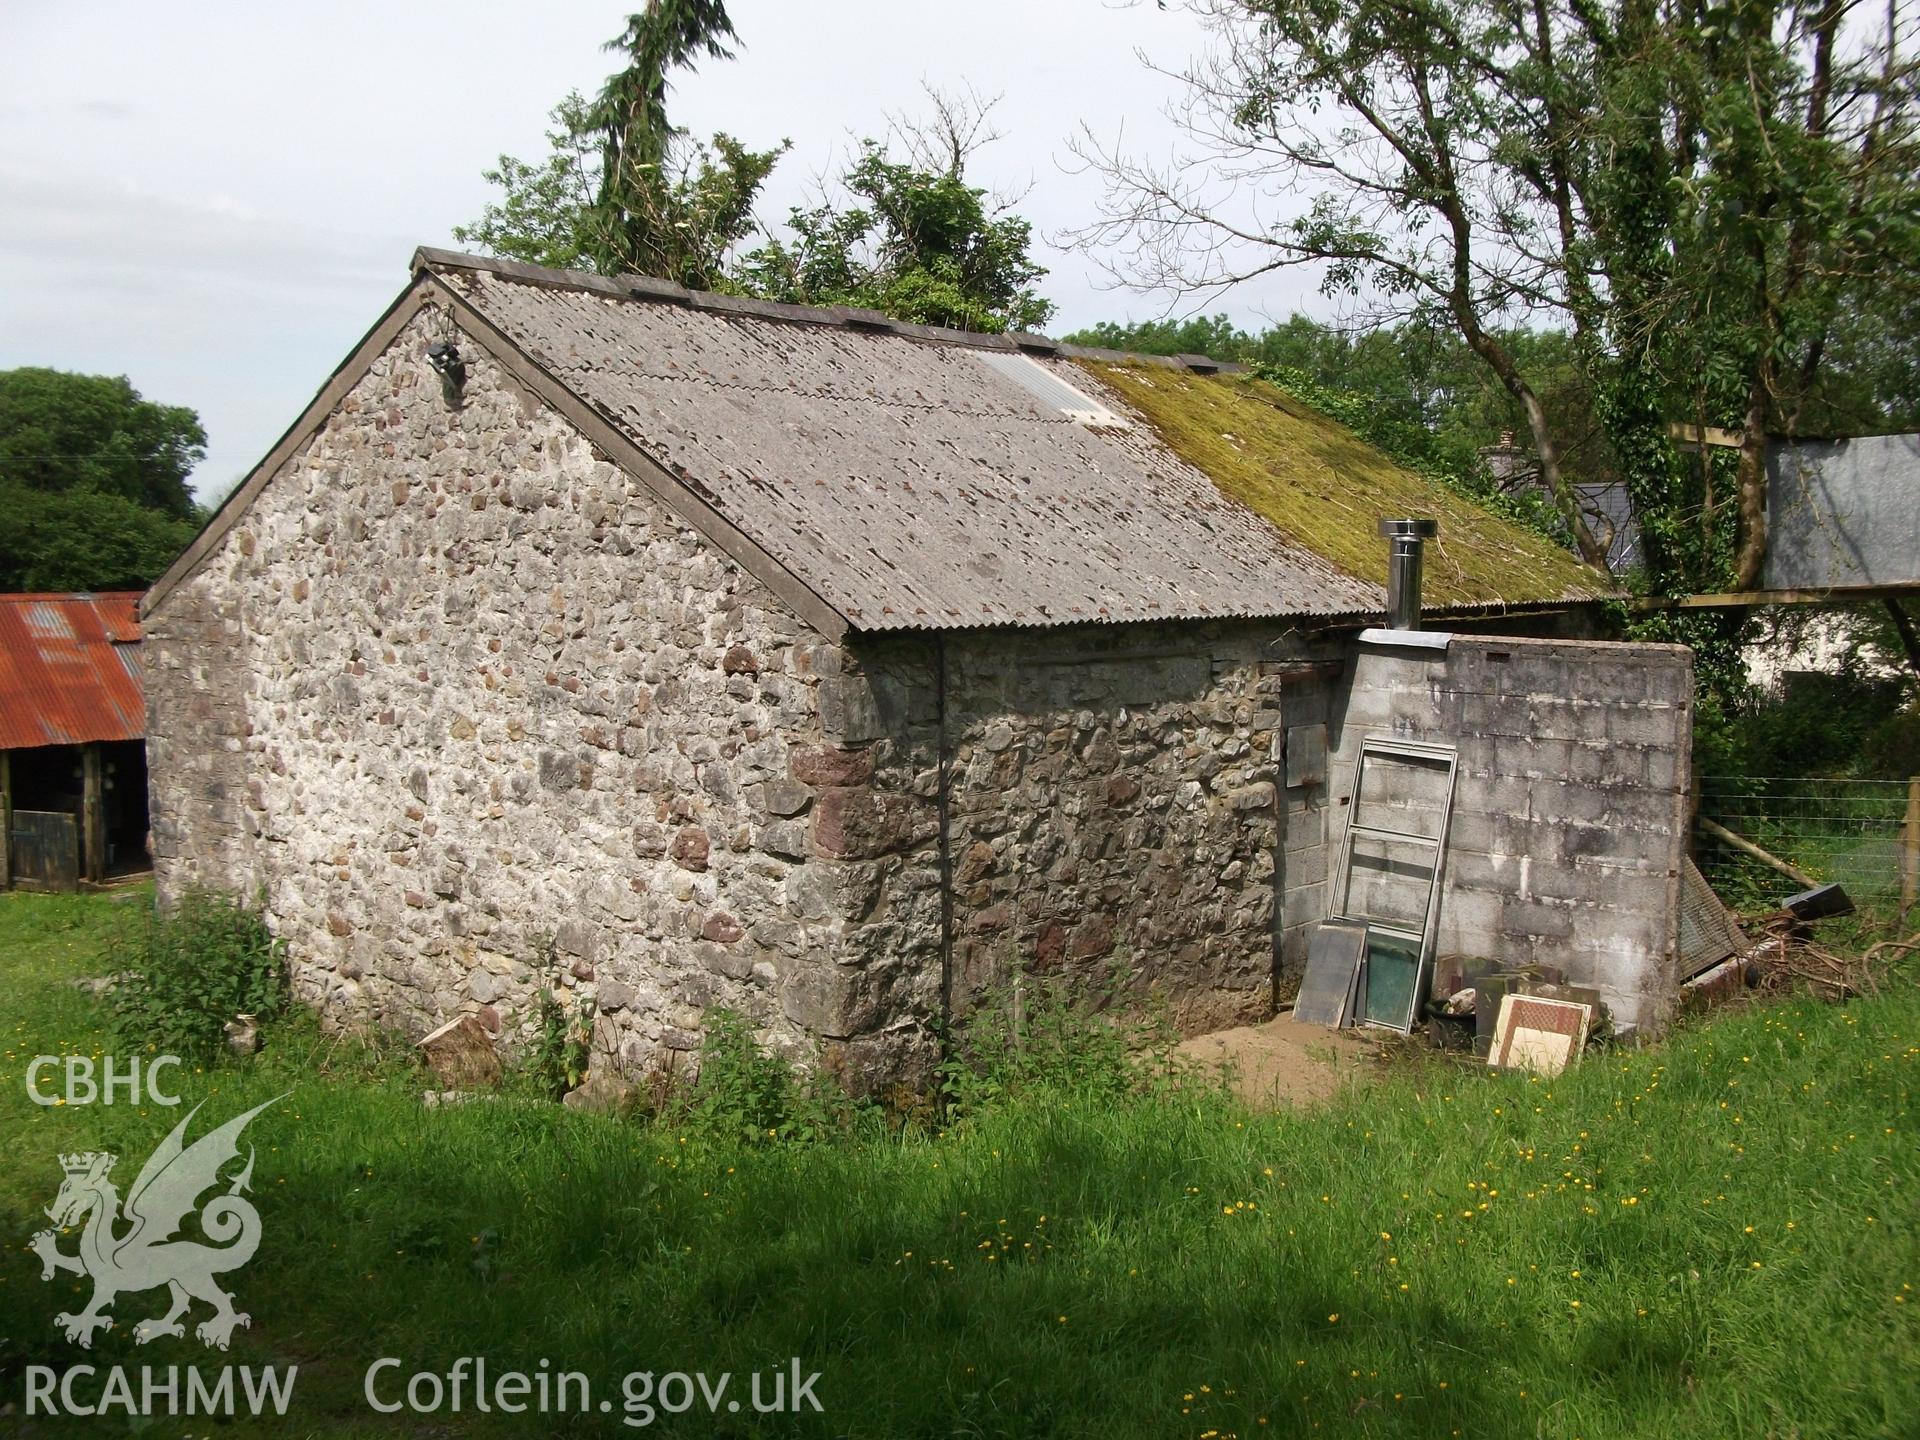 Photograph showing exterior rear and side elevation of 'ale and pail barn,' at Pant-y-Castell, Maesybont, Photographed by Mark Waghorn to meet a condition attached to planning application.